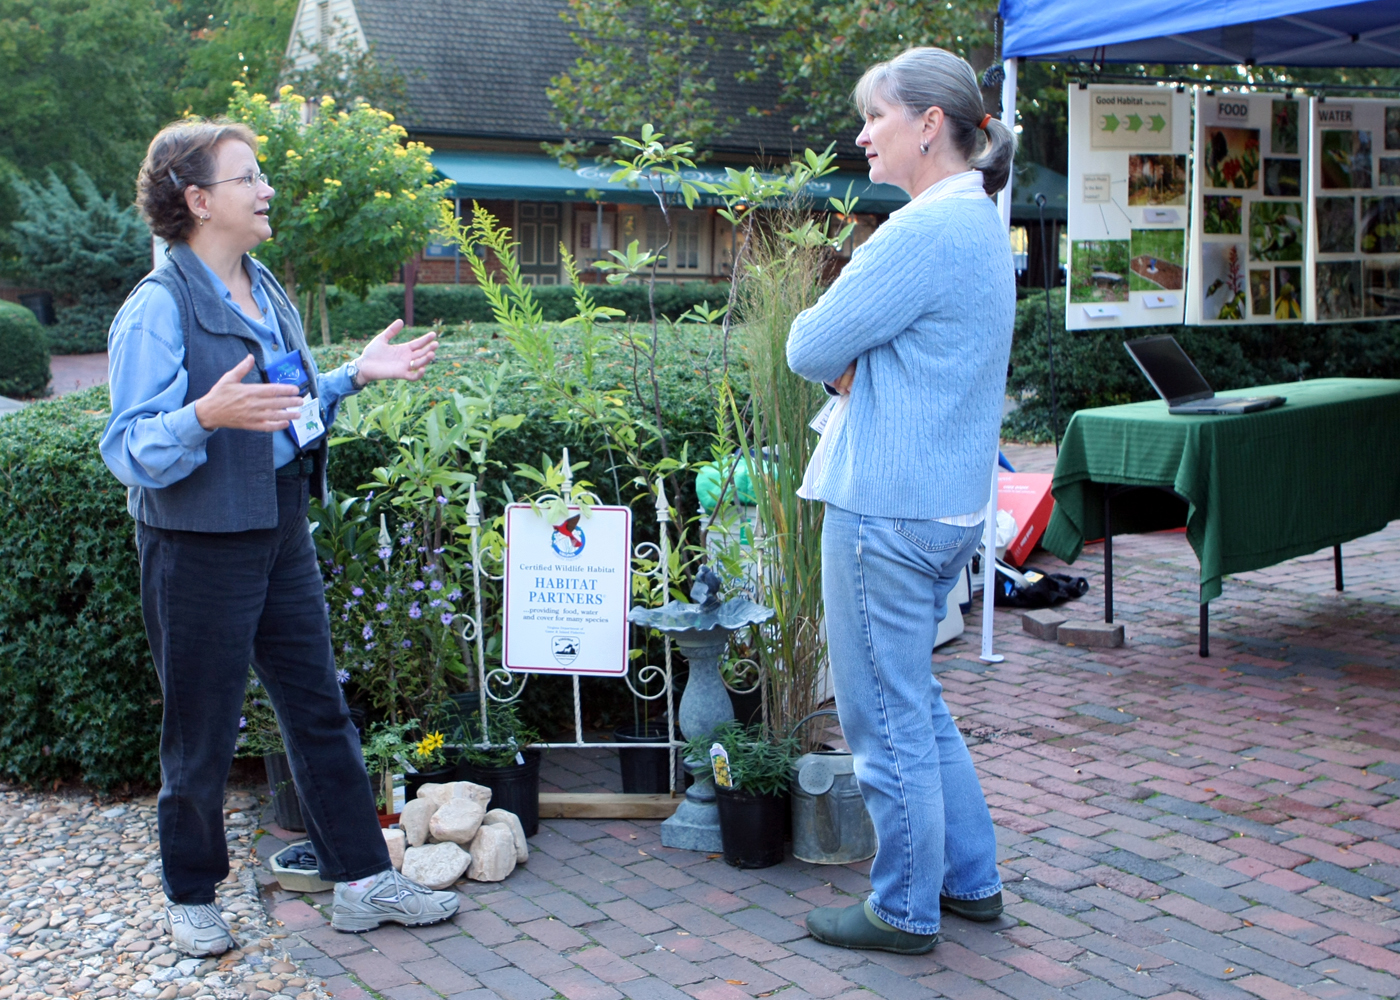 Two women talking in front of a landscaping display